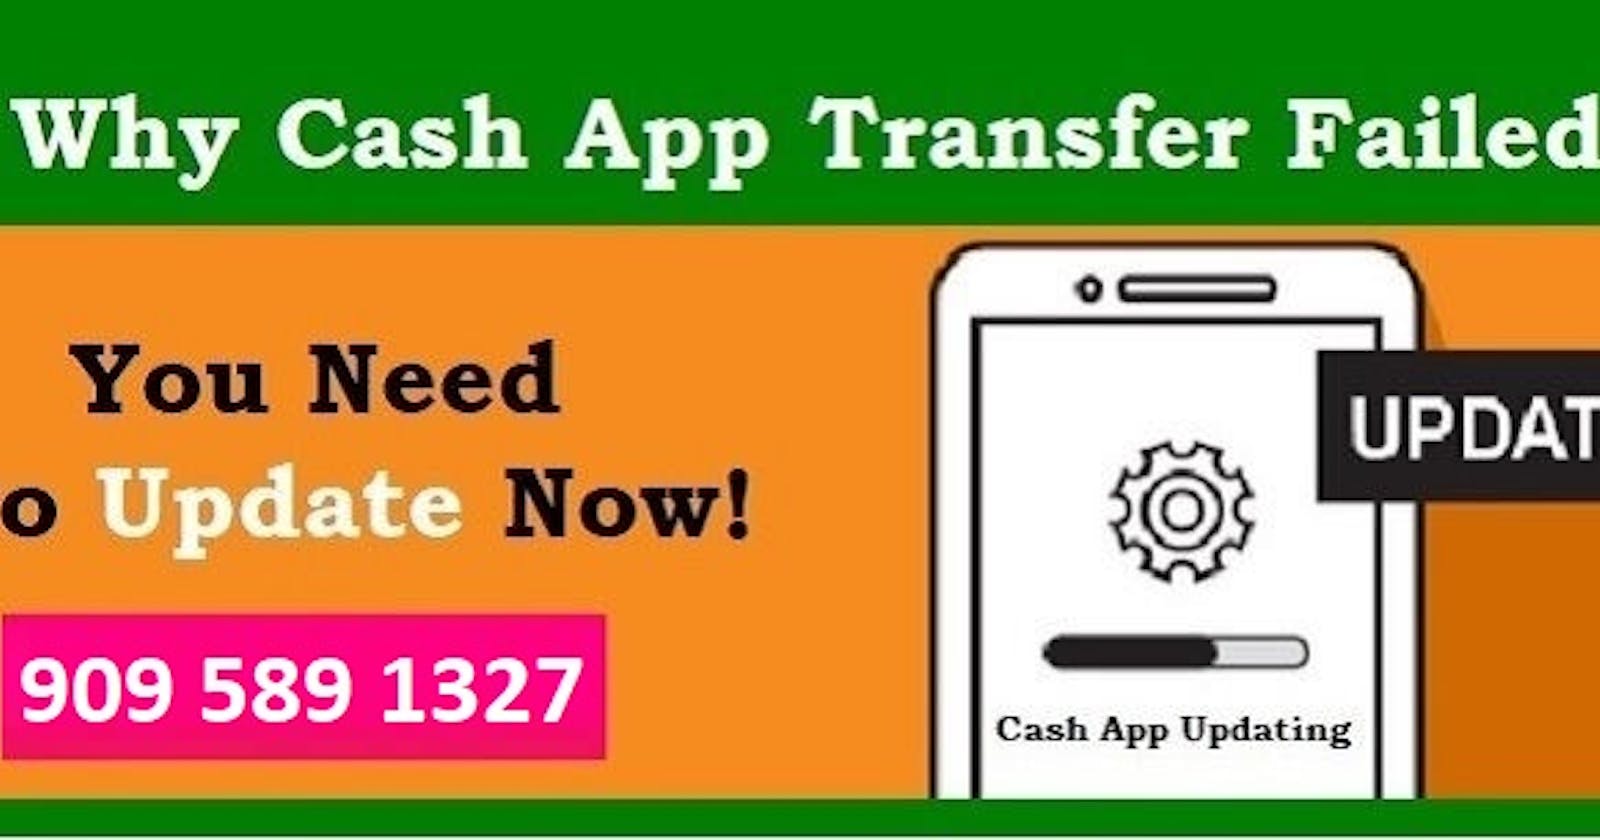 What Causes Cash App Transfer Failed Errors If You Are A New User?